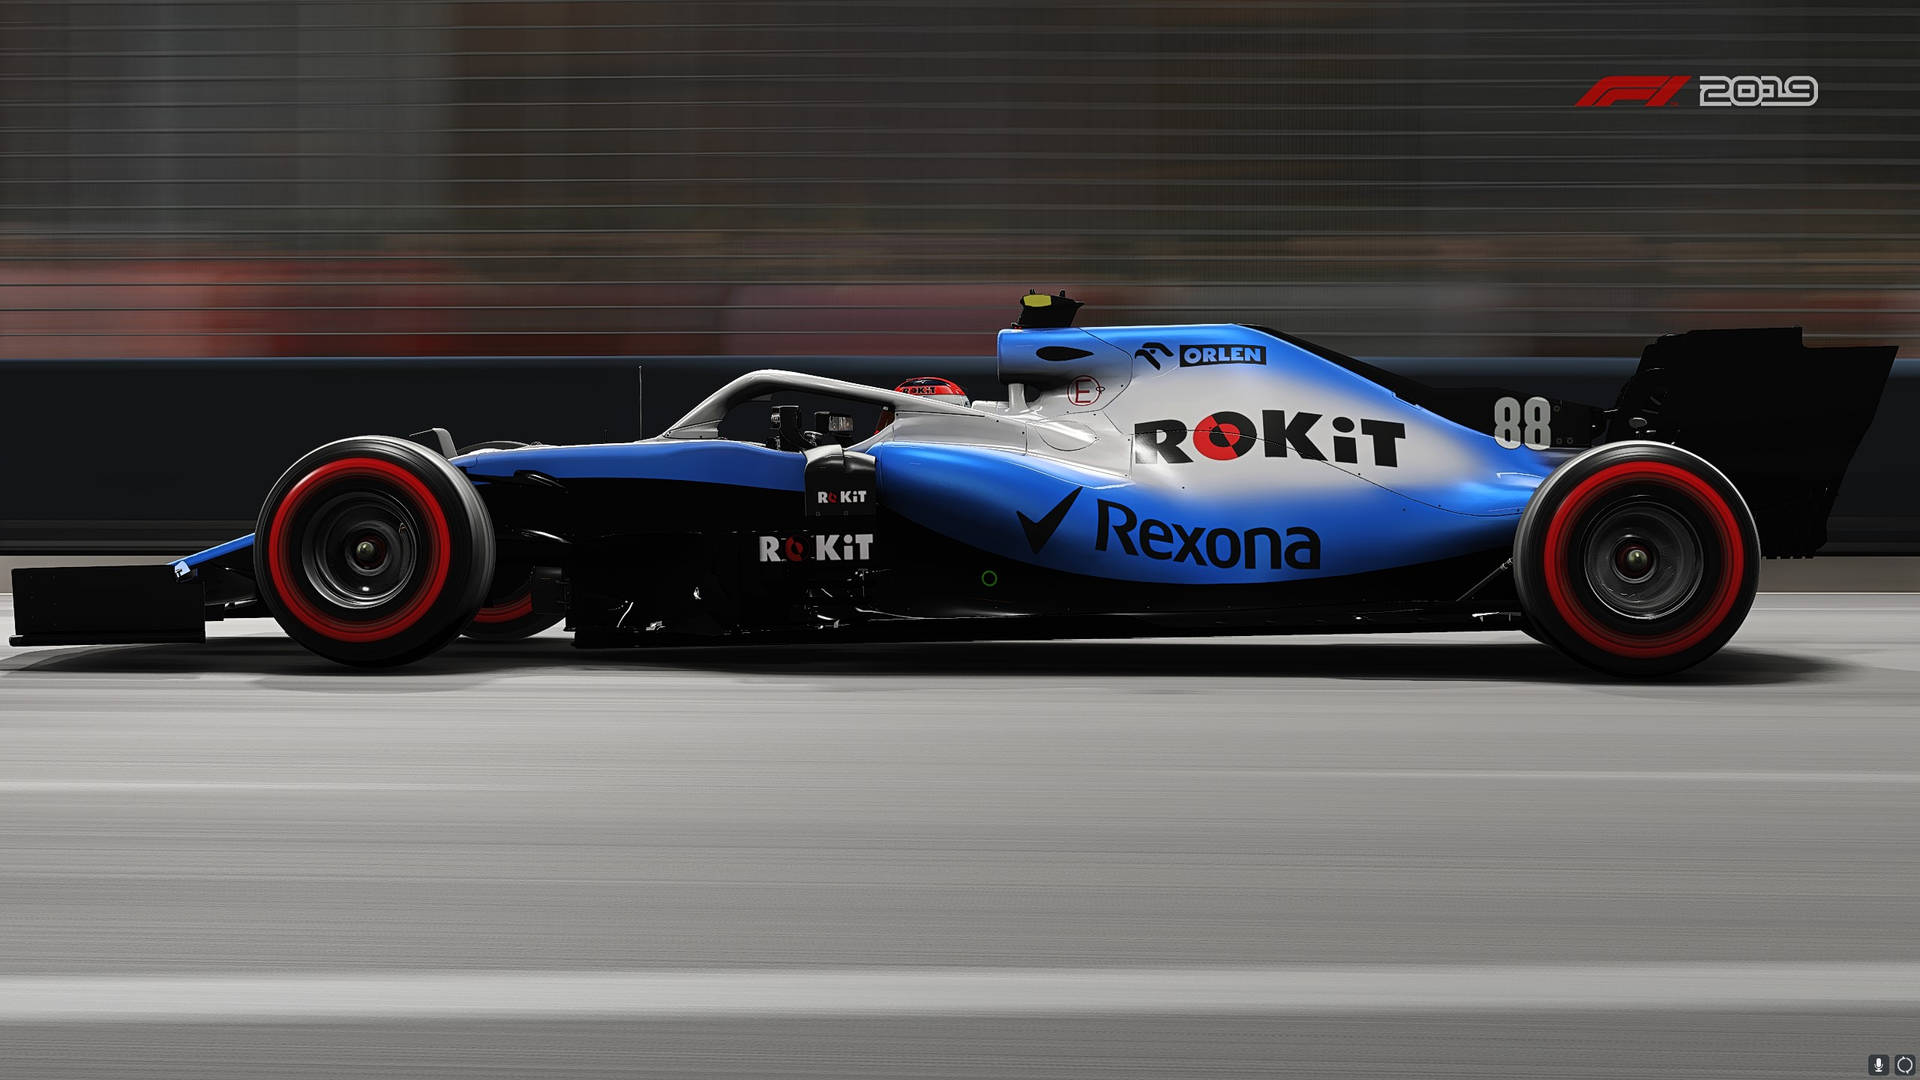 Williams Racing's #88 Car In F1 2019 Background